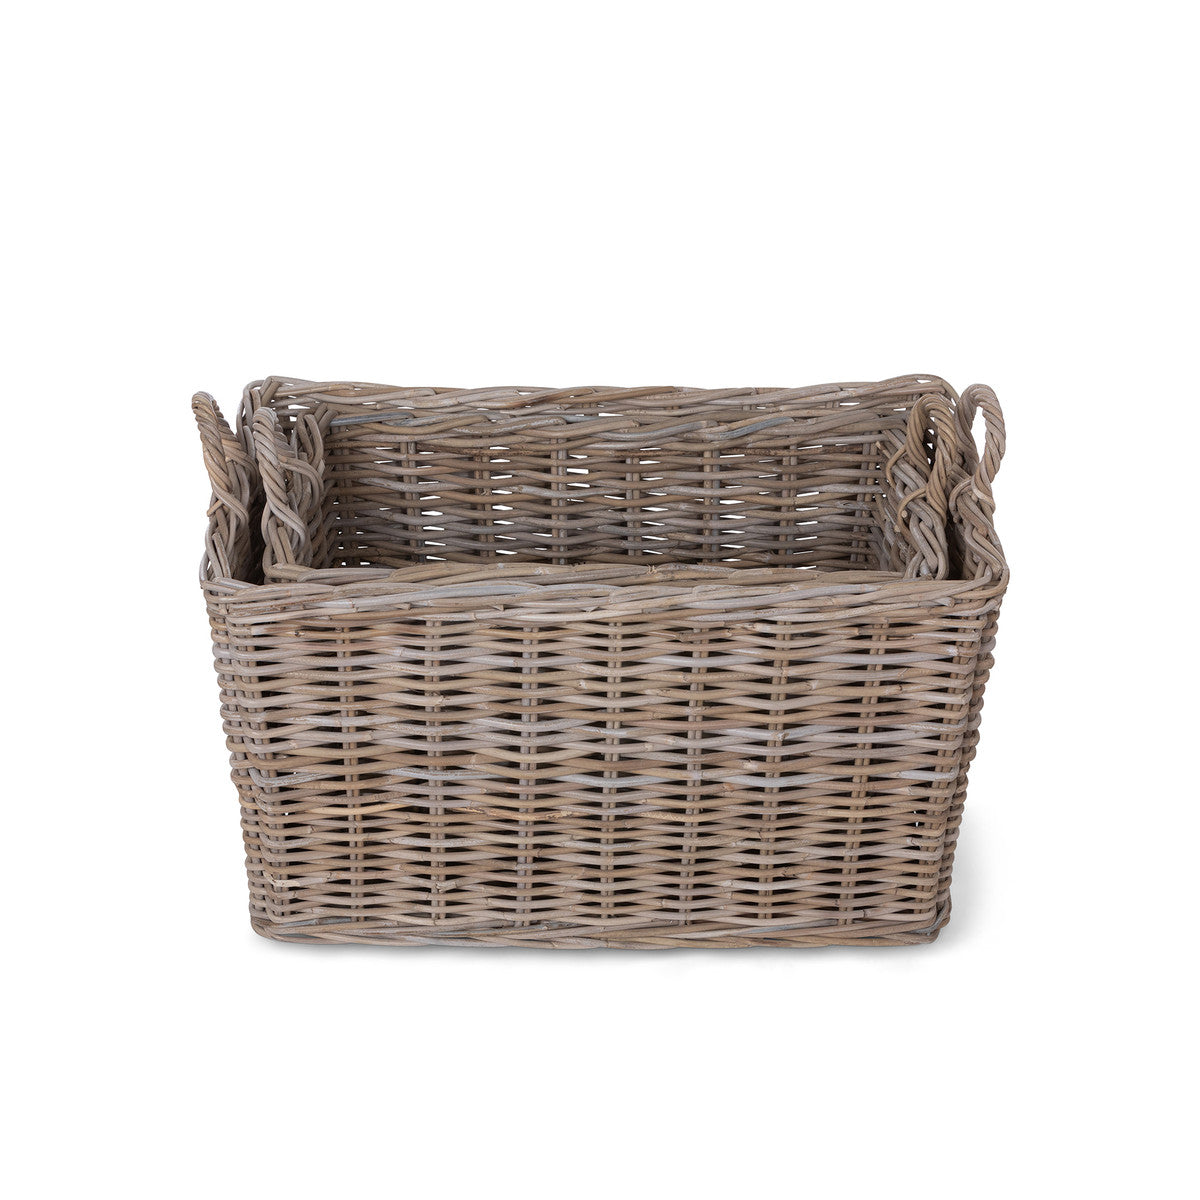 Lovecup Rattan Woven Storage Basket with Casters, Set of 2 L217